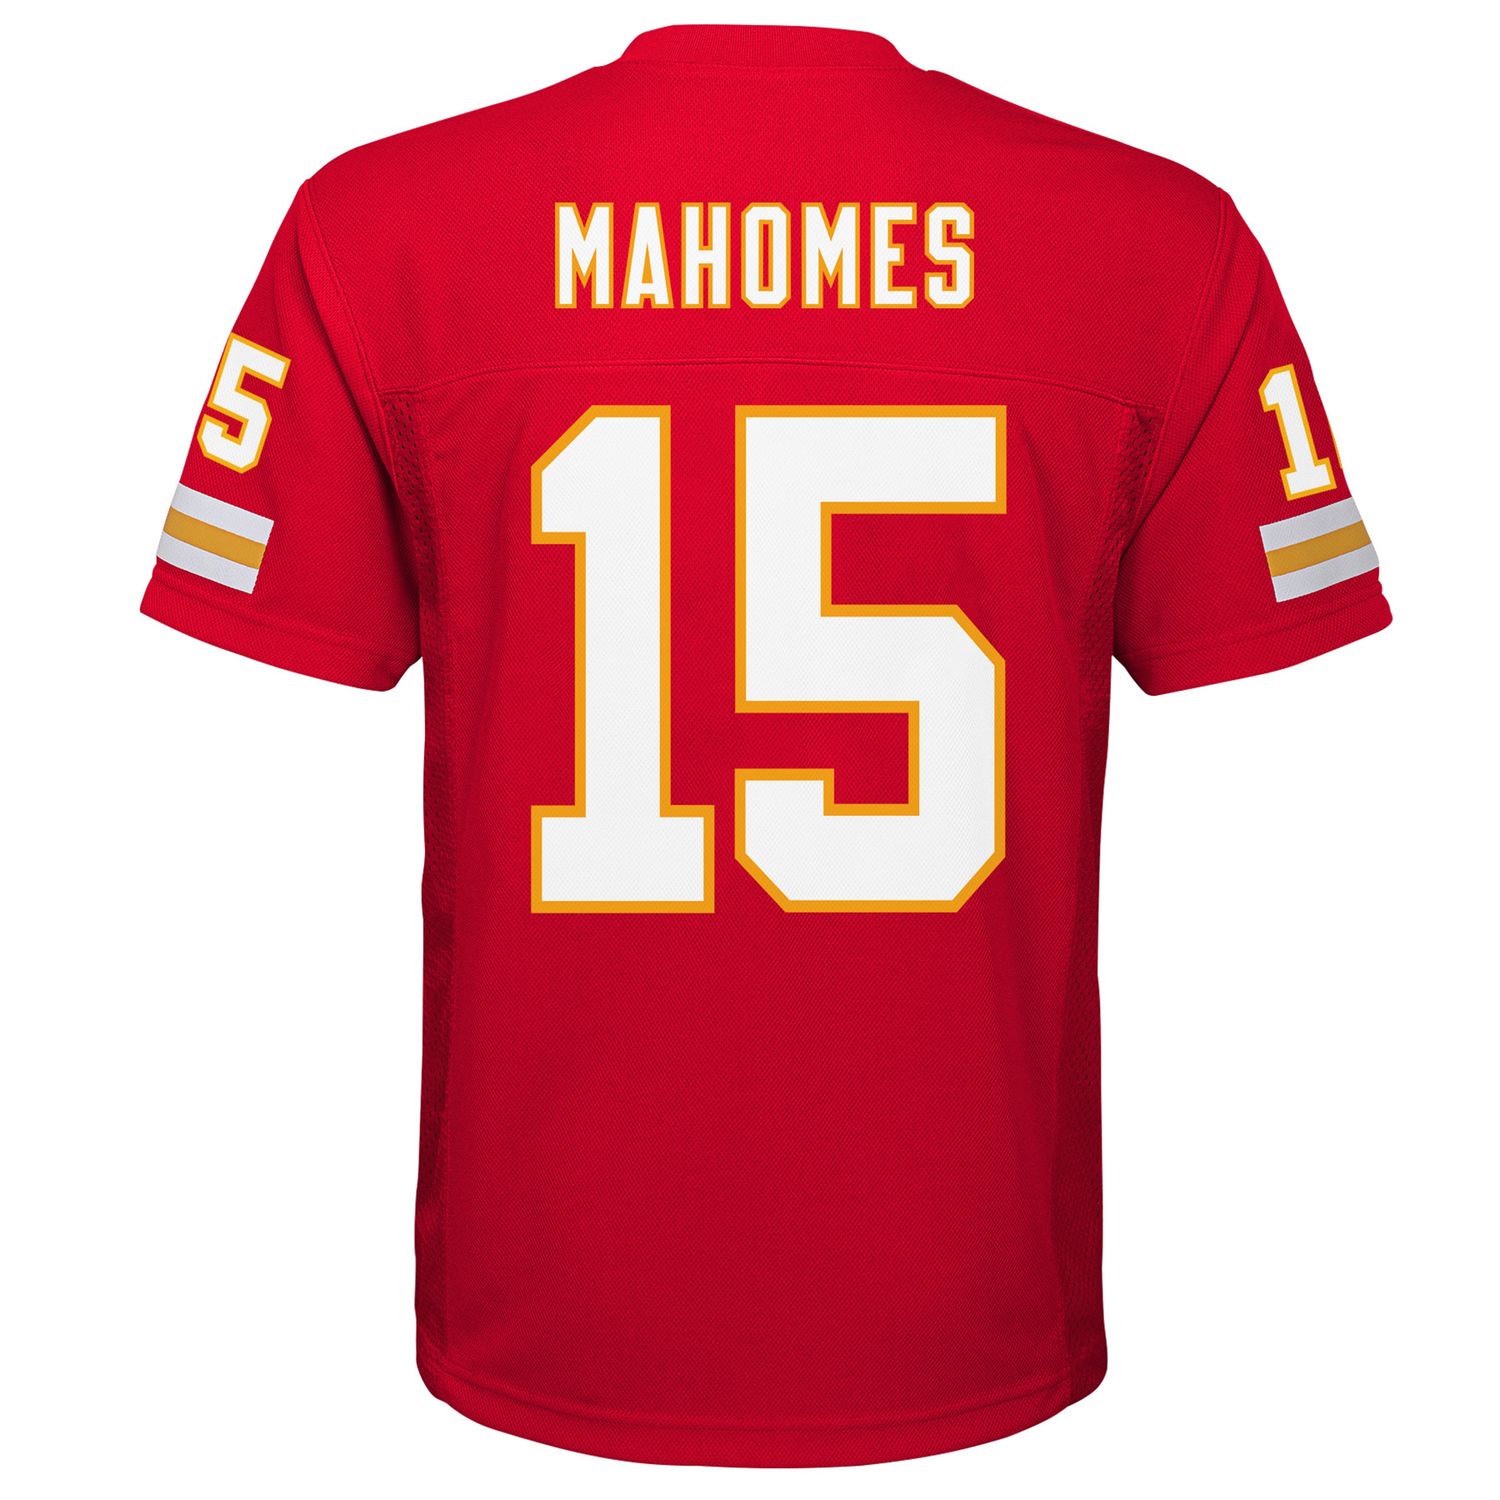 official mahomes jersey